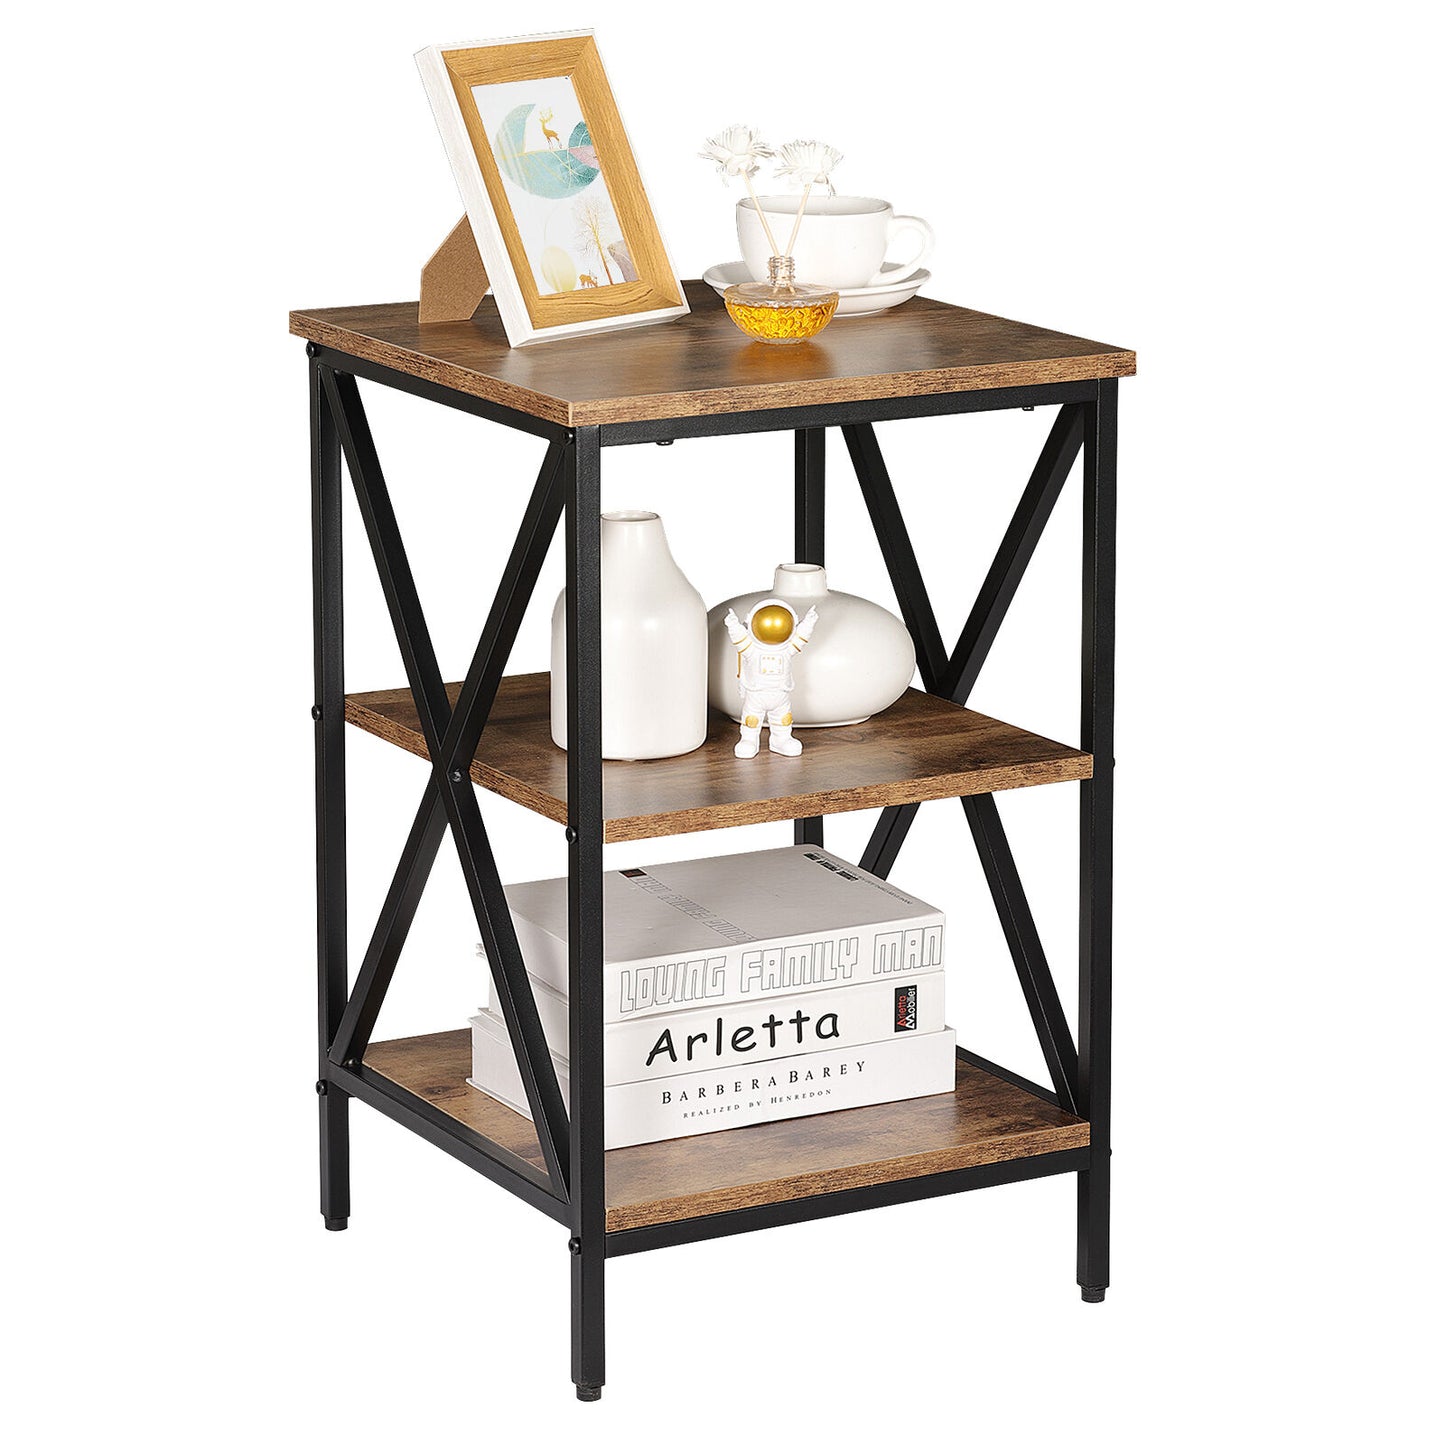 3-Tier Side Table X Design End Table Metal Frame W/Storage Shelves Rustic Brown